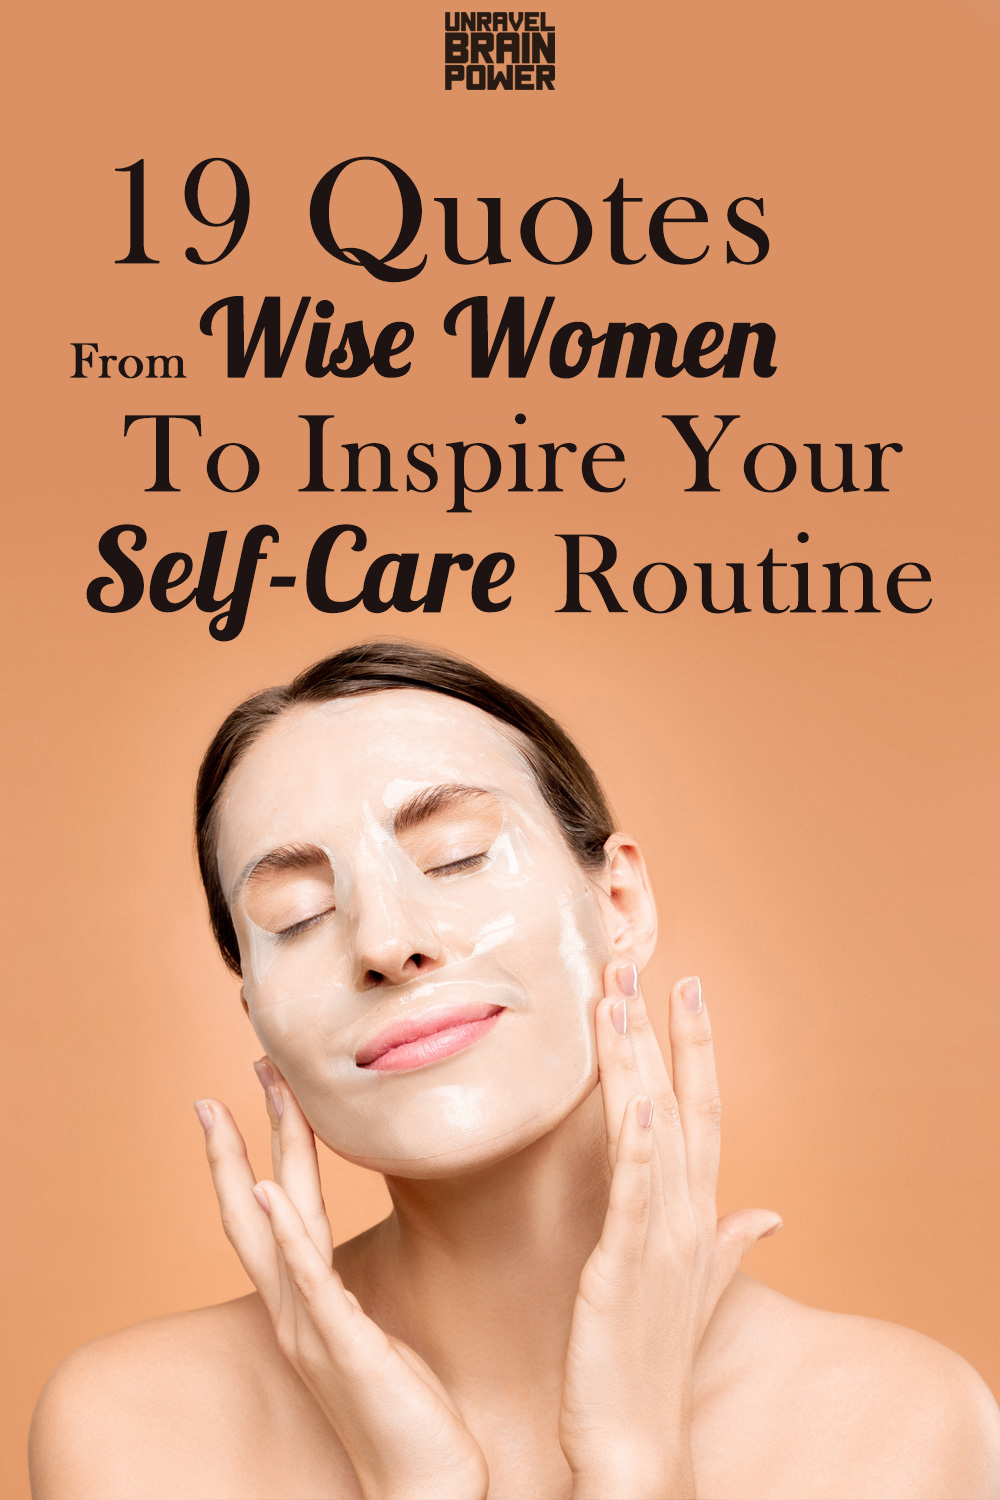 19 Quotes From Wise Women To Inspire Your Self-Care Routine